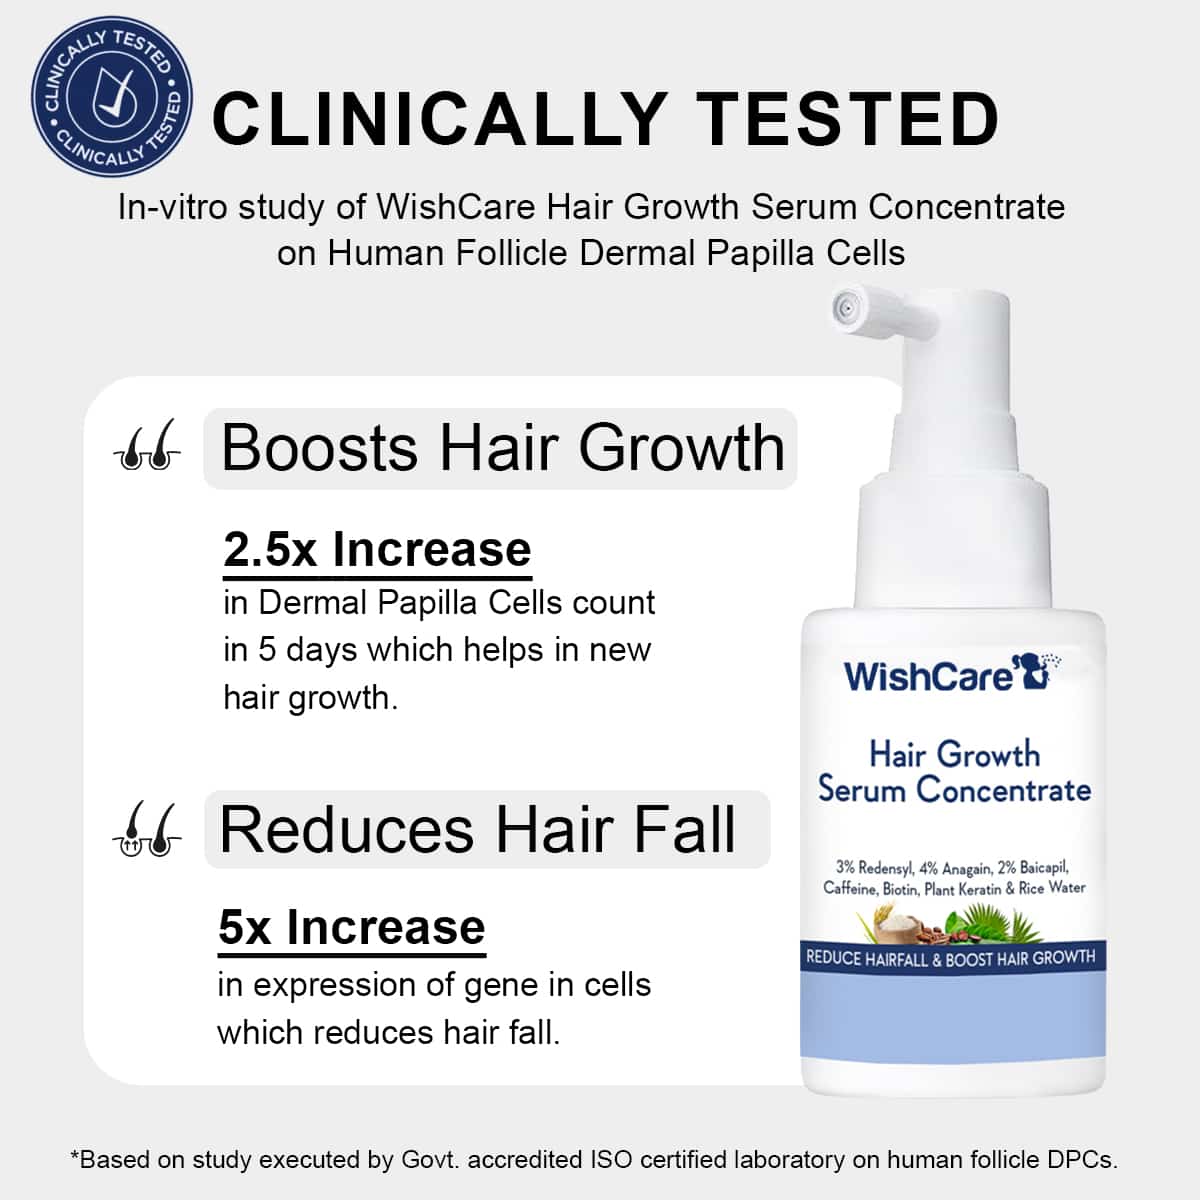 clinically tested certificate of wishcare hair growth serum that boosts hair growth